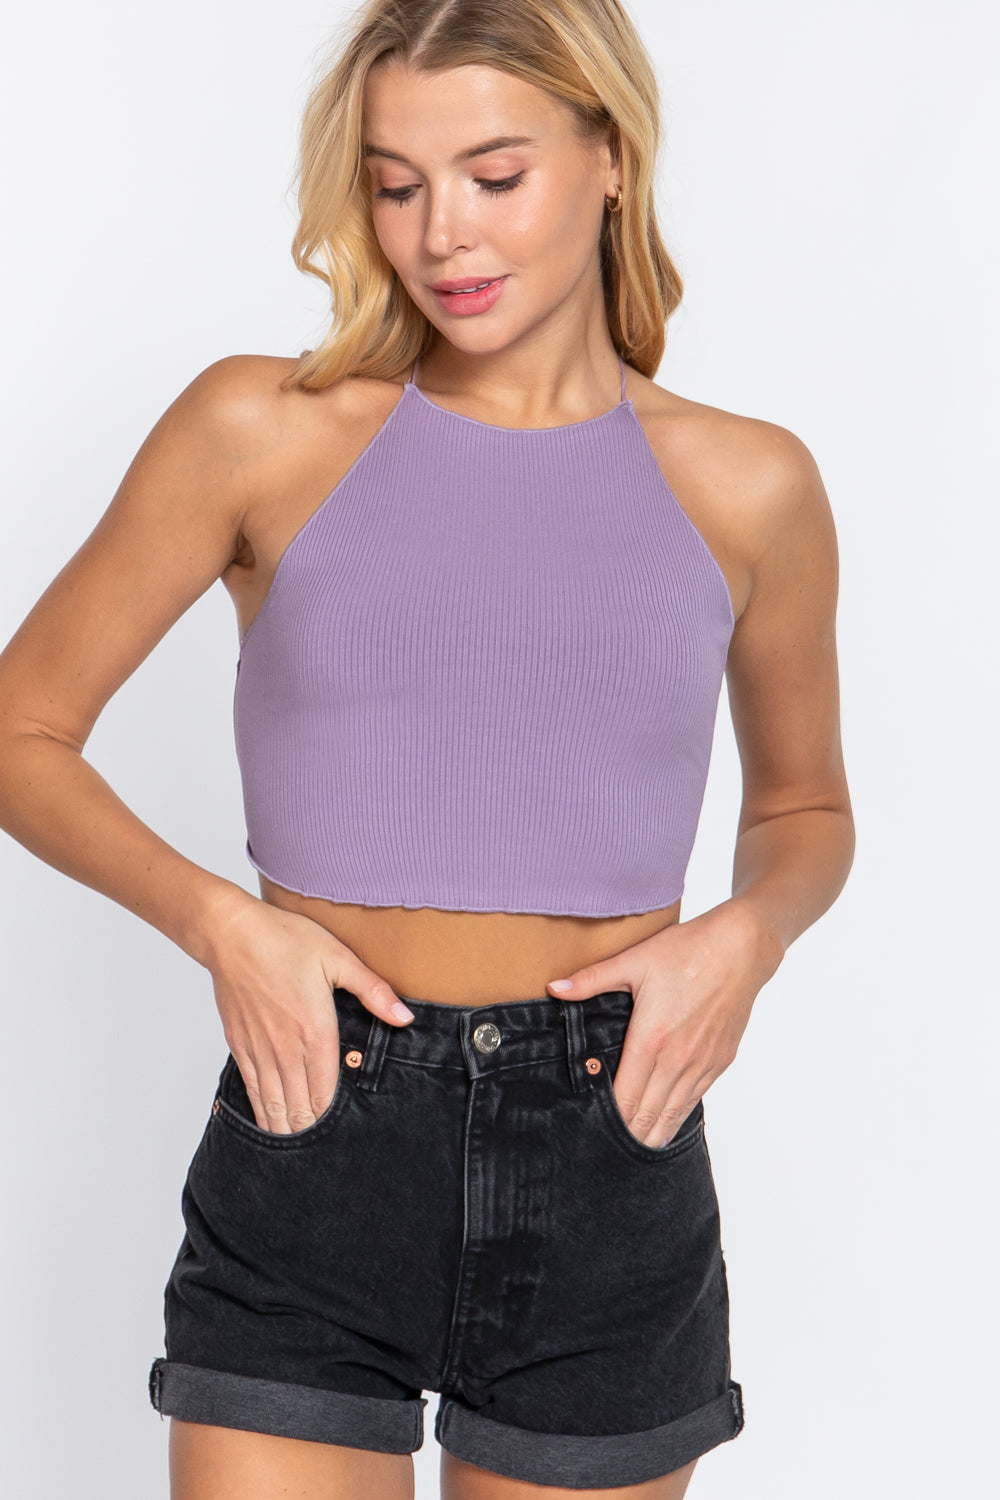 Lace Up Open Cross Back Crop Cami - Tigbuls Variety Fashion